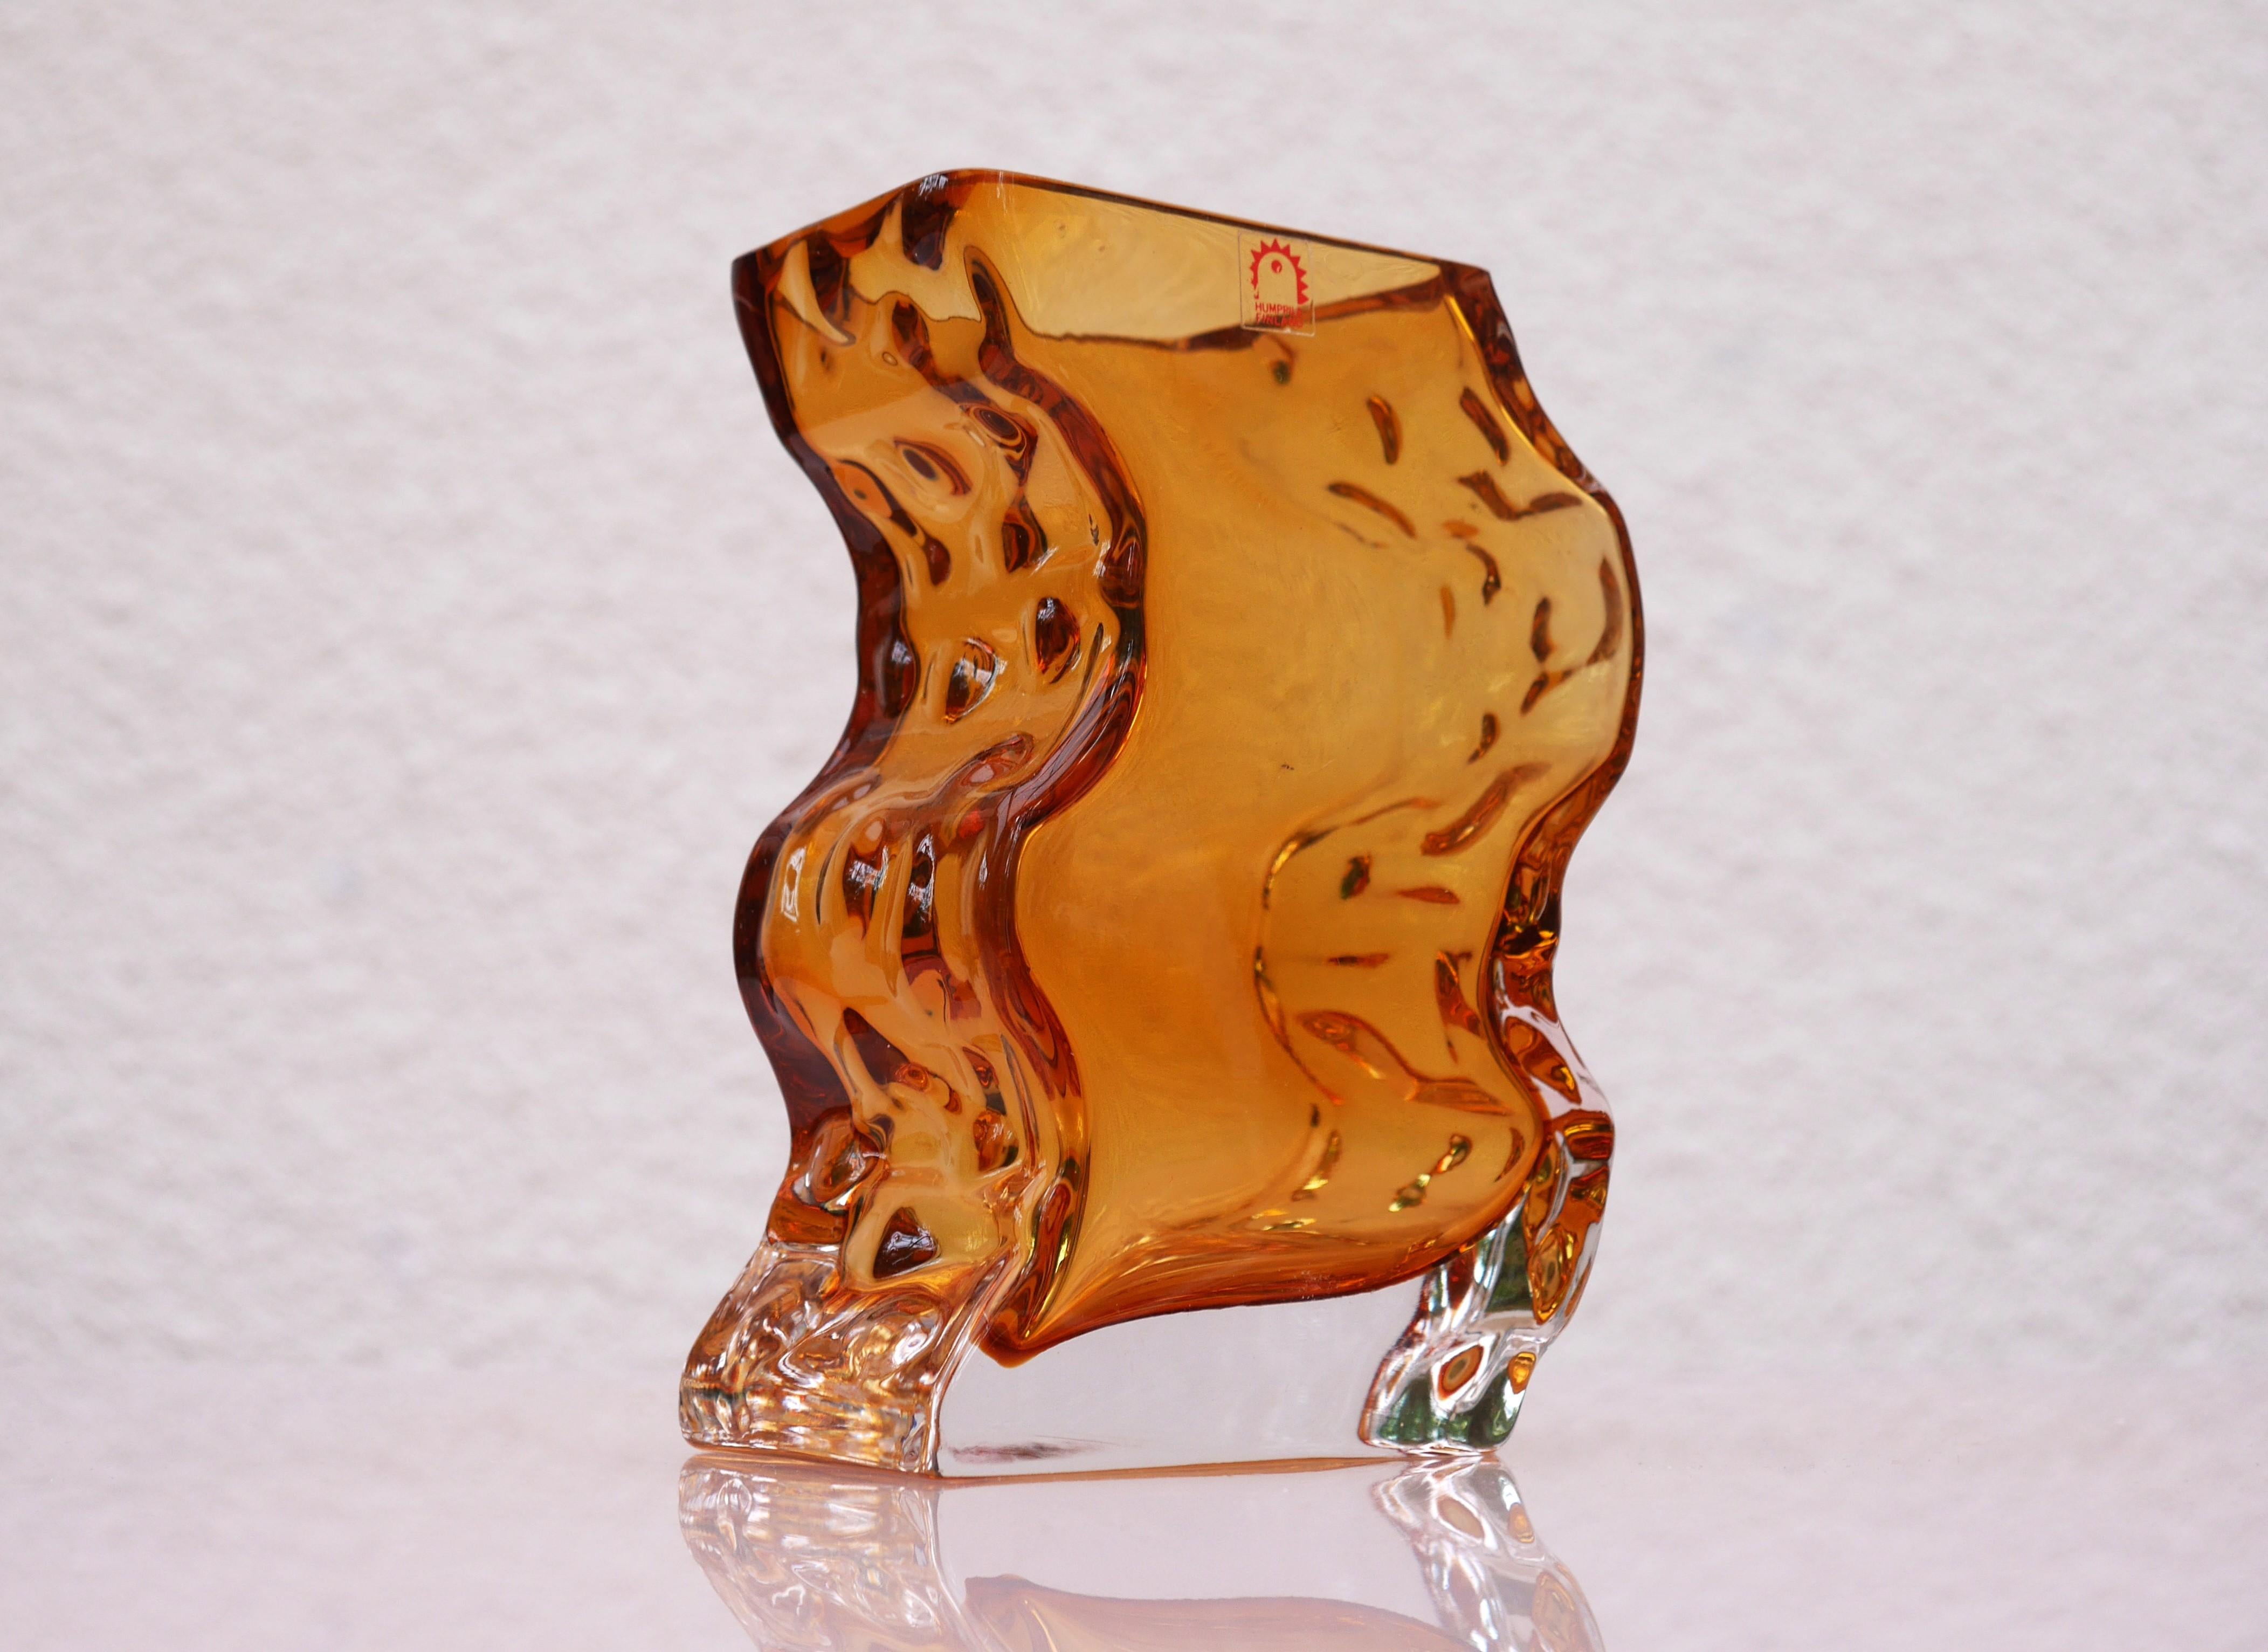 Hand-Crafted Mid-century modern glass vase made by Henrik Koivula for Humppila, Finland